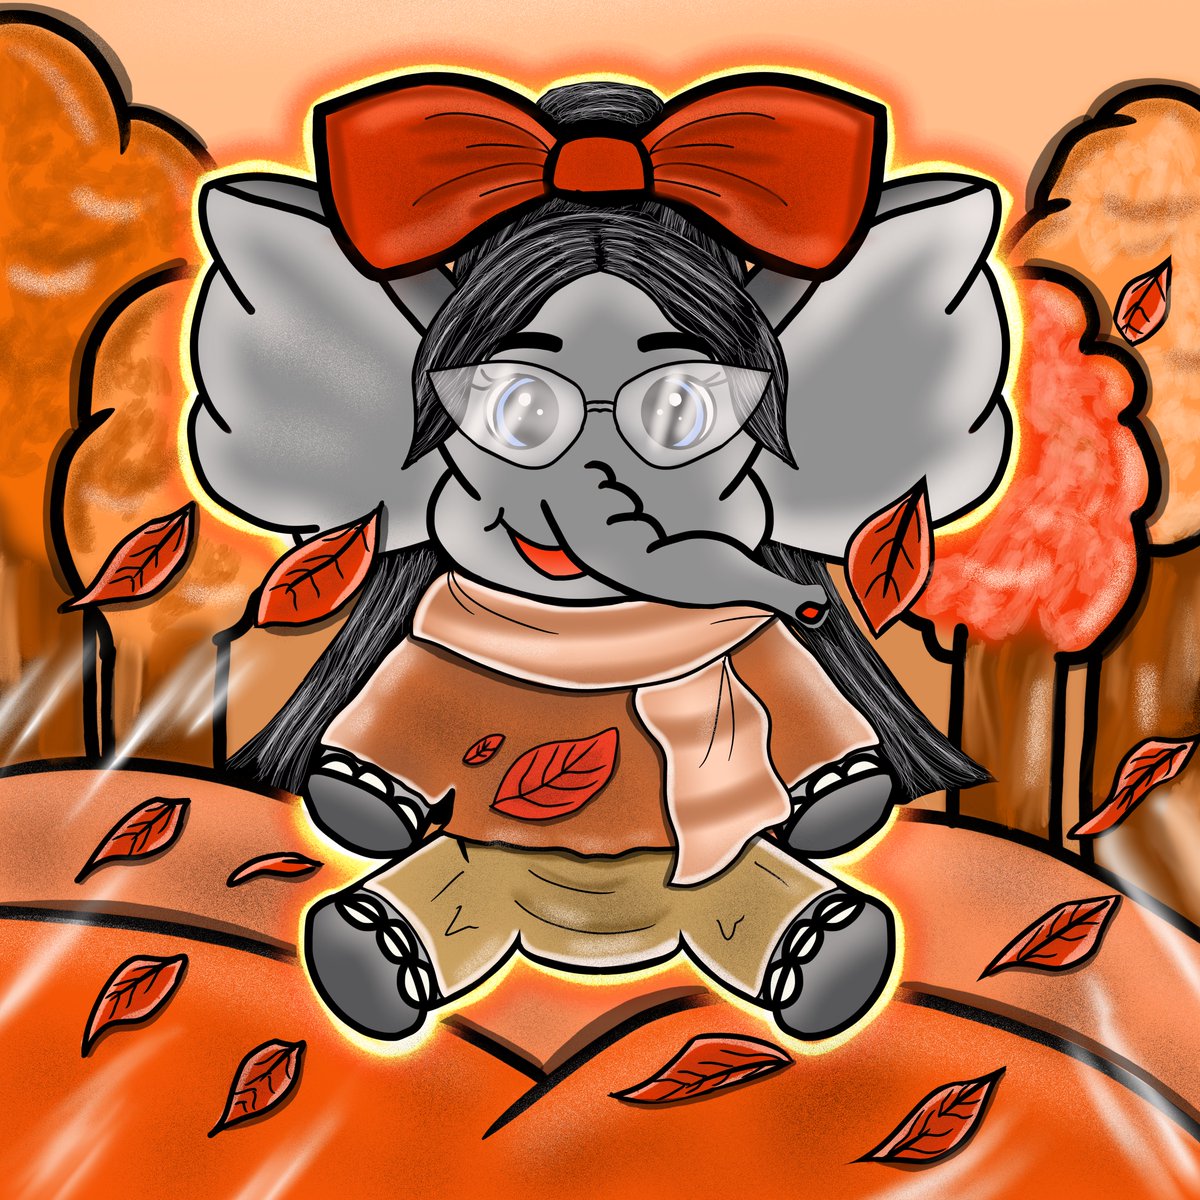 NEW DROP !!! 🧡🍂 

Autumn themed Baby was Recommended ! 1st Baby Elephant is done  from the “ Share me ideas and recommendations ” Post 🔥

Baby Elephant #206 is now available on opensea ! I’m in LOVE !!! 😍🍂🔥

🔗 Link : 

opensea.io/assets/matic/0…

#StylishBabyElephants